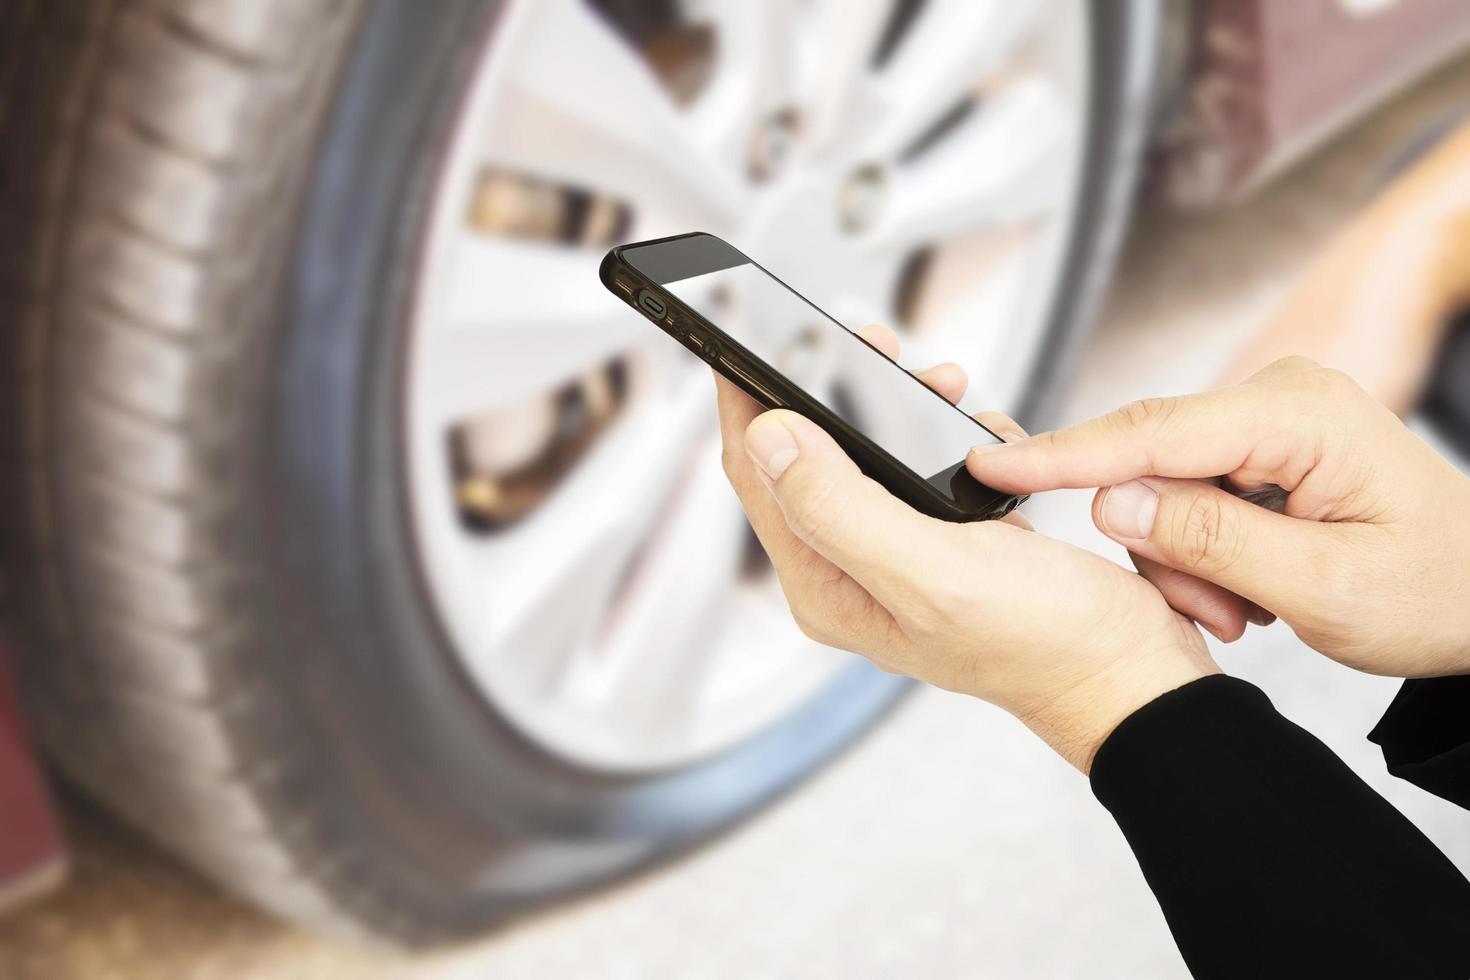 Man is using mobile phone calling somebody over car flat tire background photo